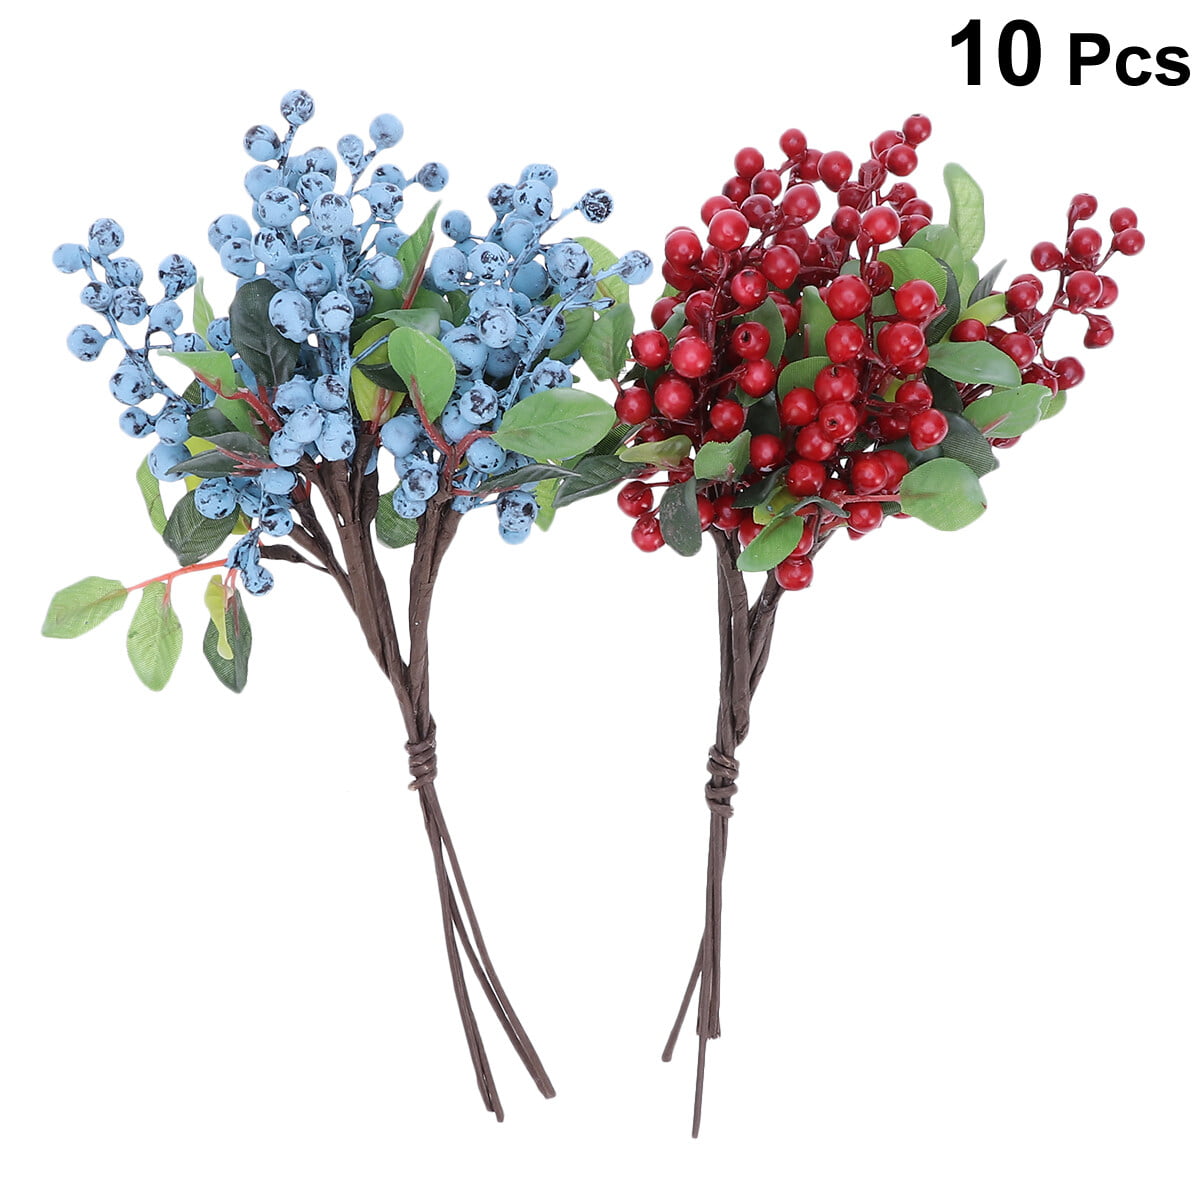 Visland 6PCS Artificial Red Berry Stems,16 Inch Long Red Berries